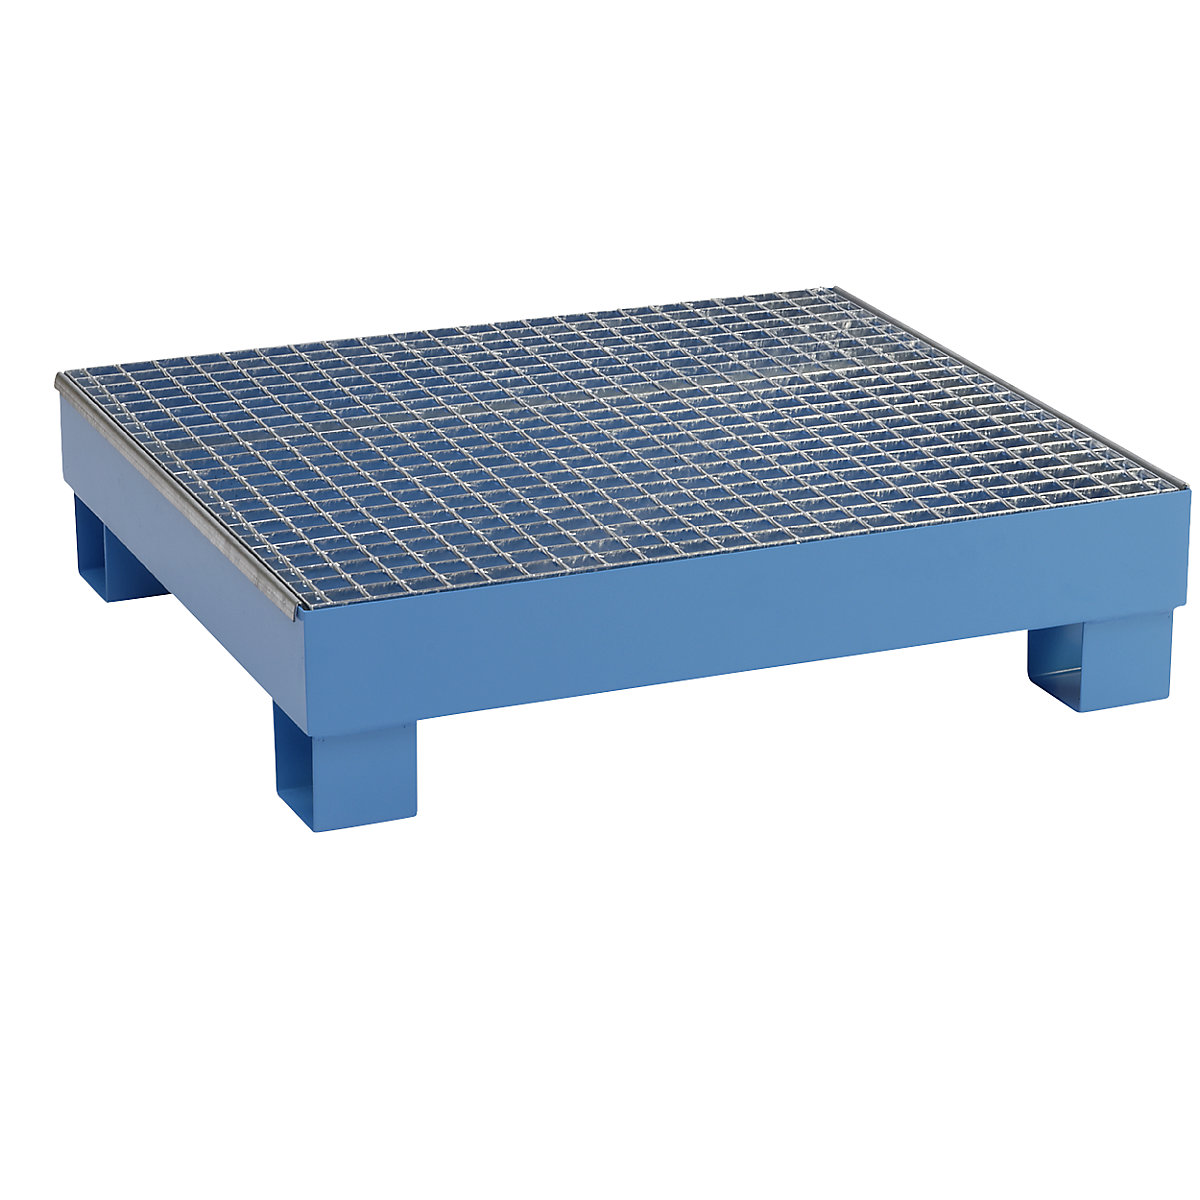 Sump tray for 60 l – eurokraft basic, LxWxH 800 x 1300 x 205 mm, with certification, powder coated blue, with grate-4